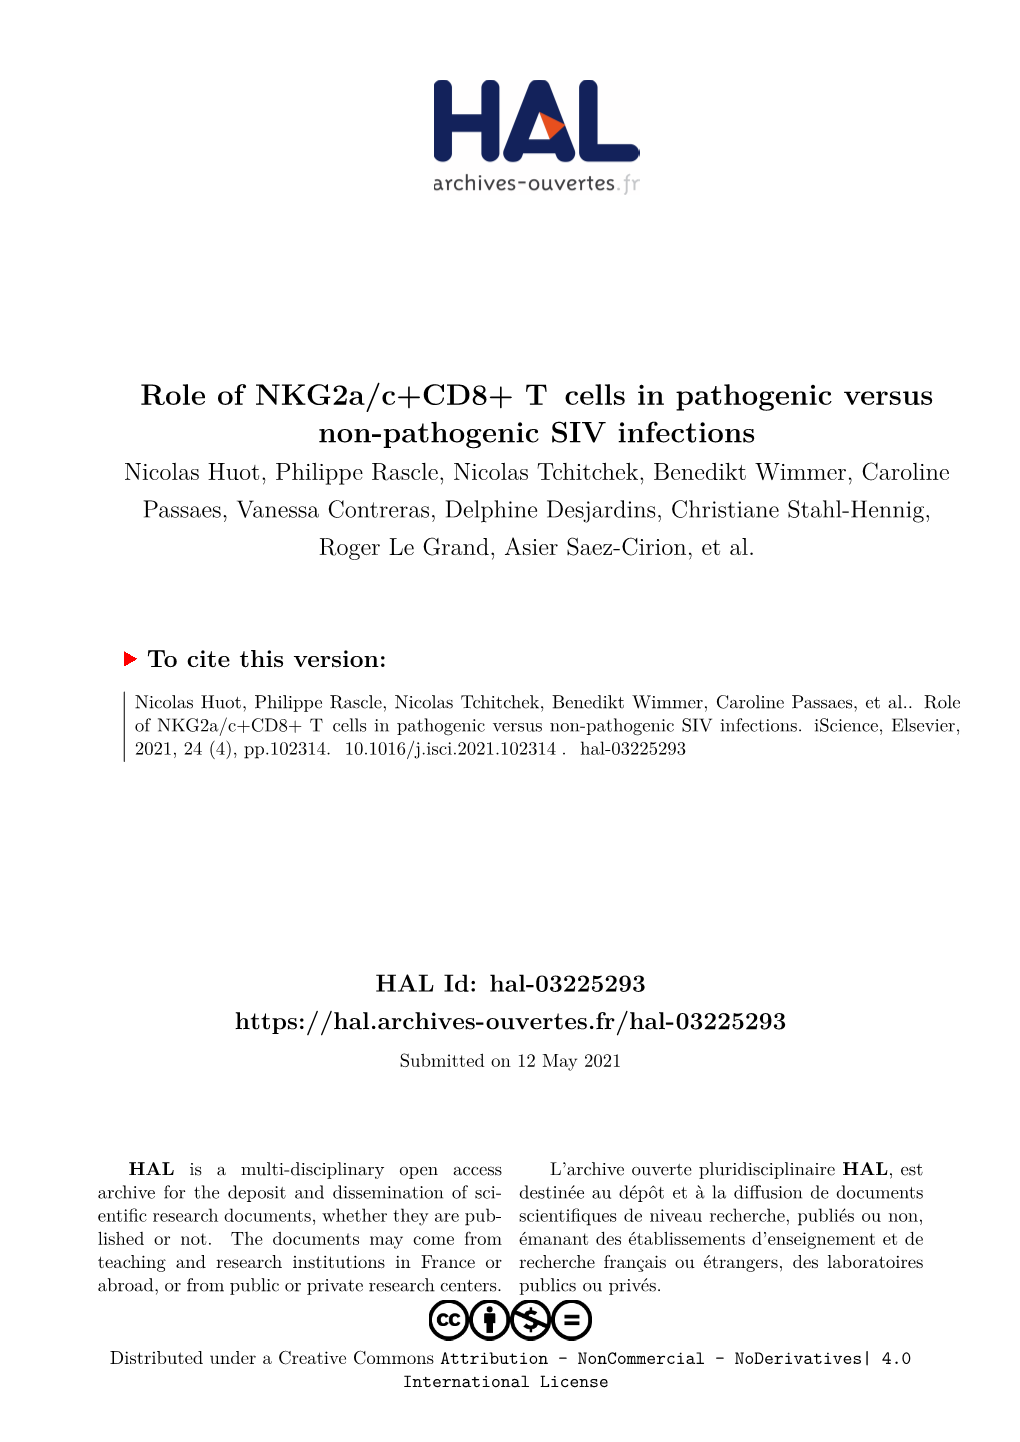 Role of Nkg2a/C+CD8+ T Cells in Pathogenic Versus Non-Pathogenic